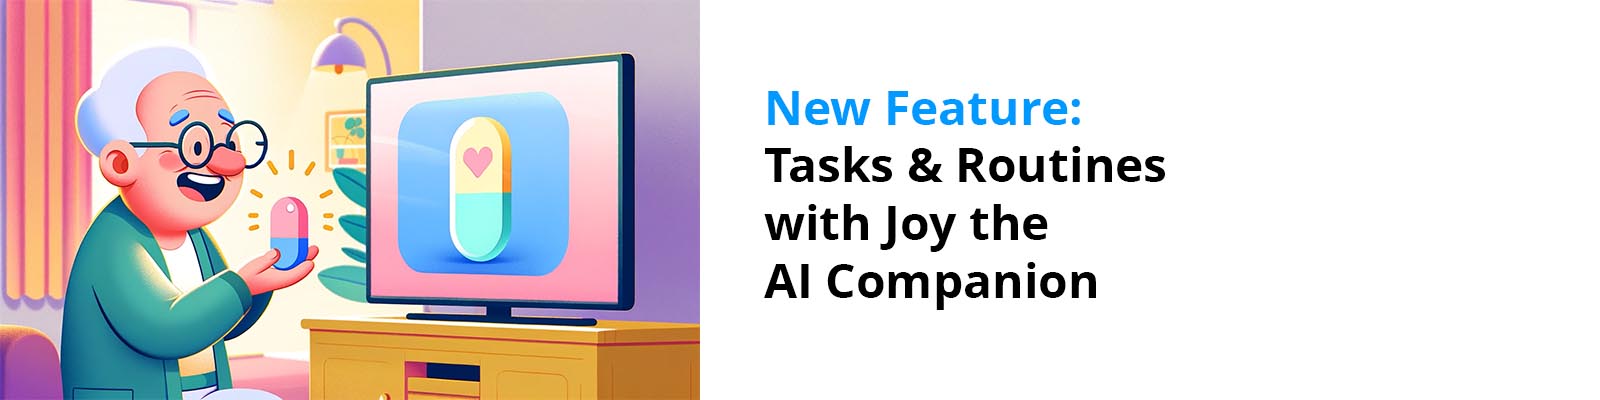 New Feature: Tasks and Routines including Joy the Senior AI Companion